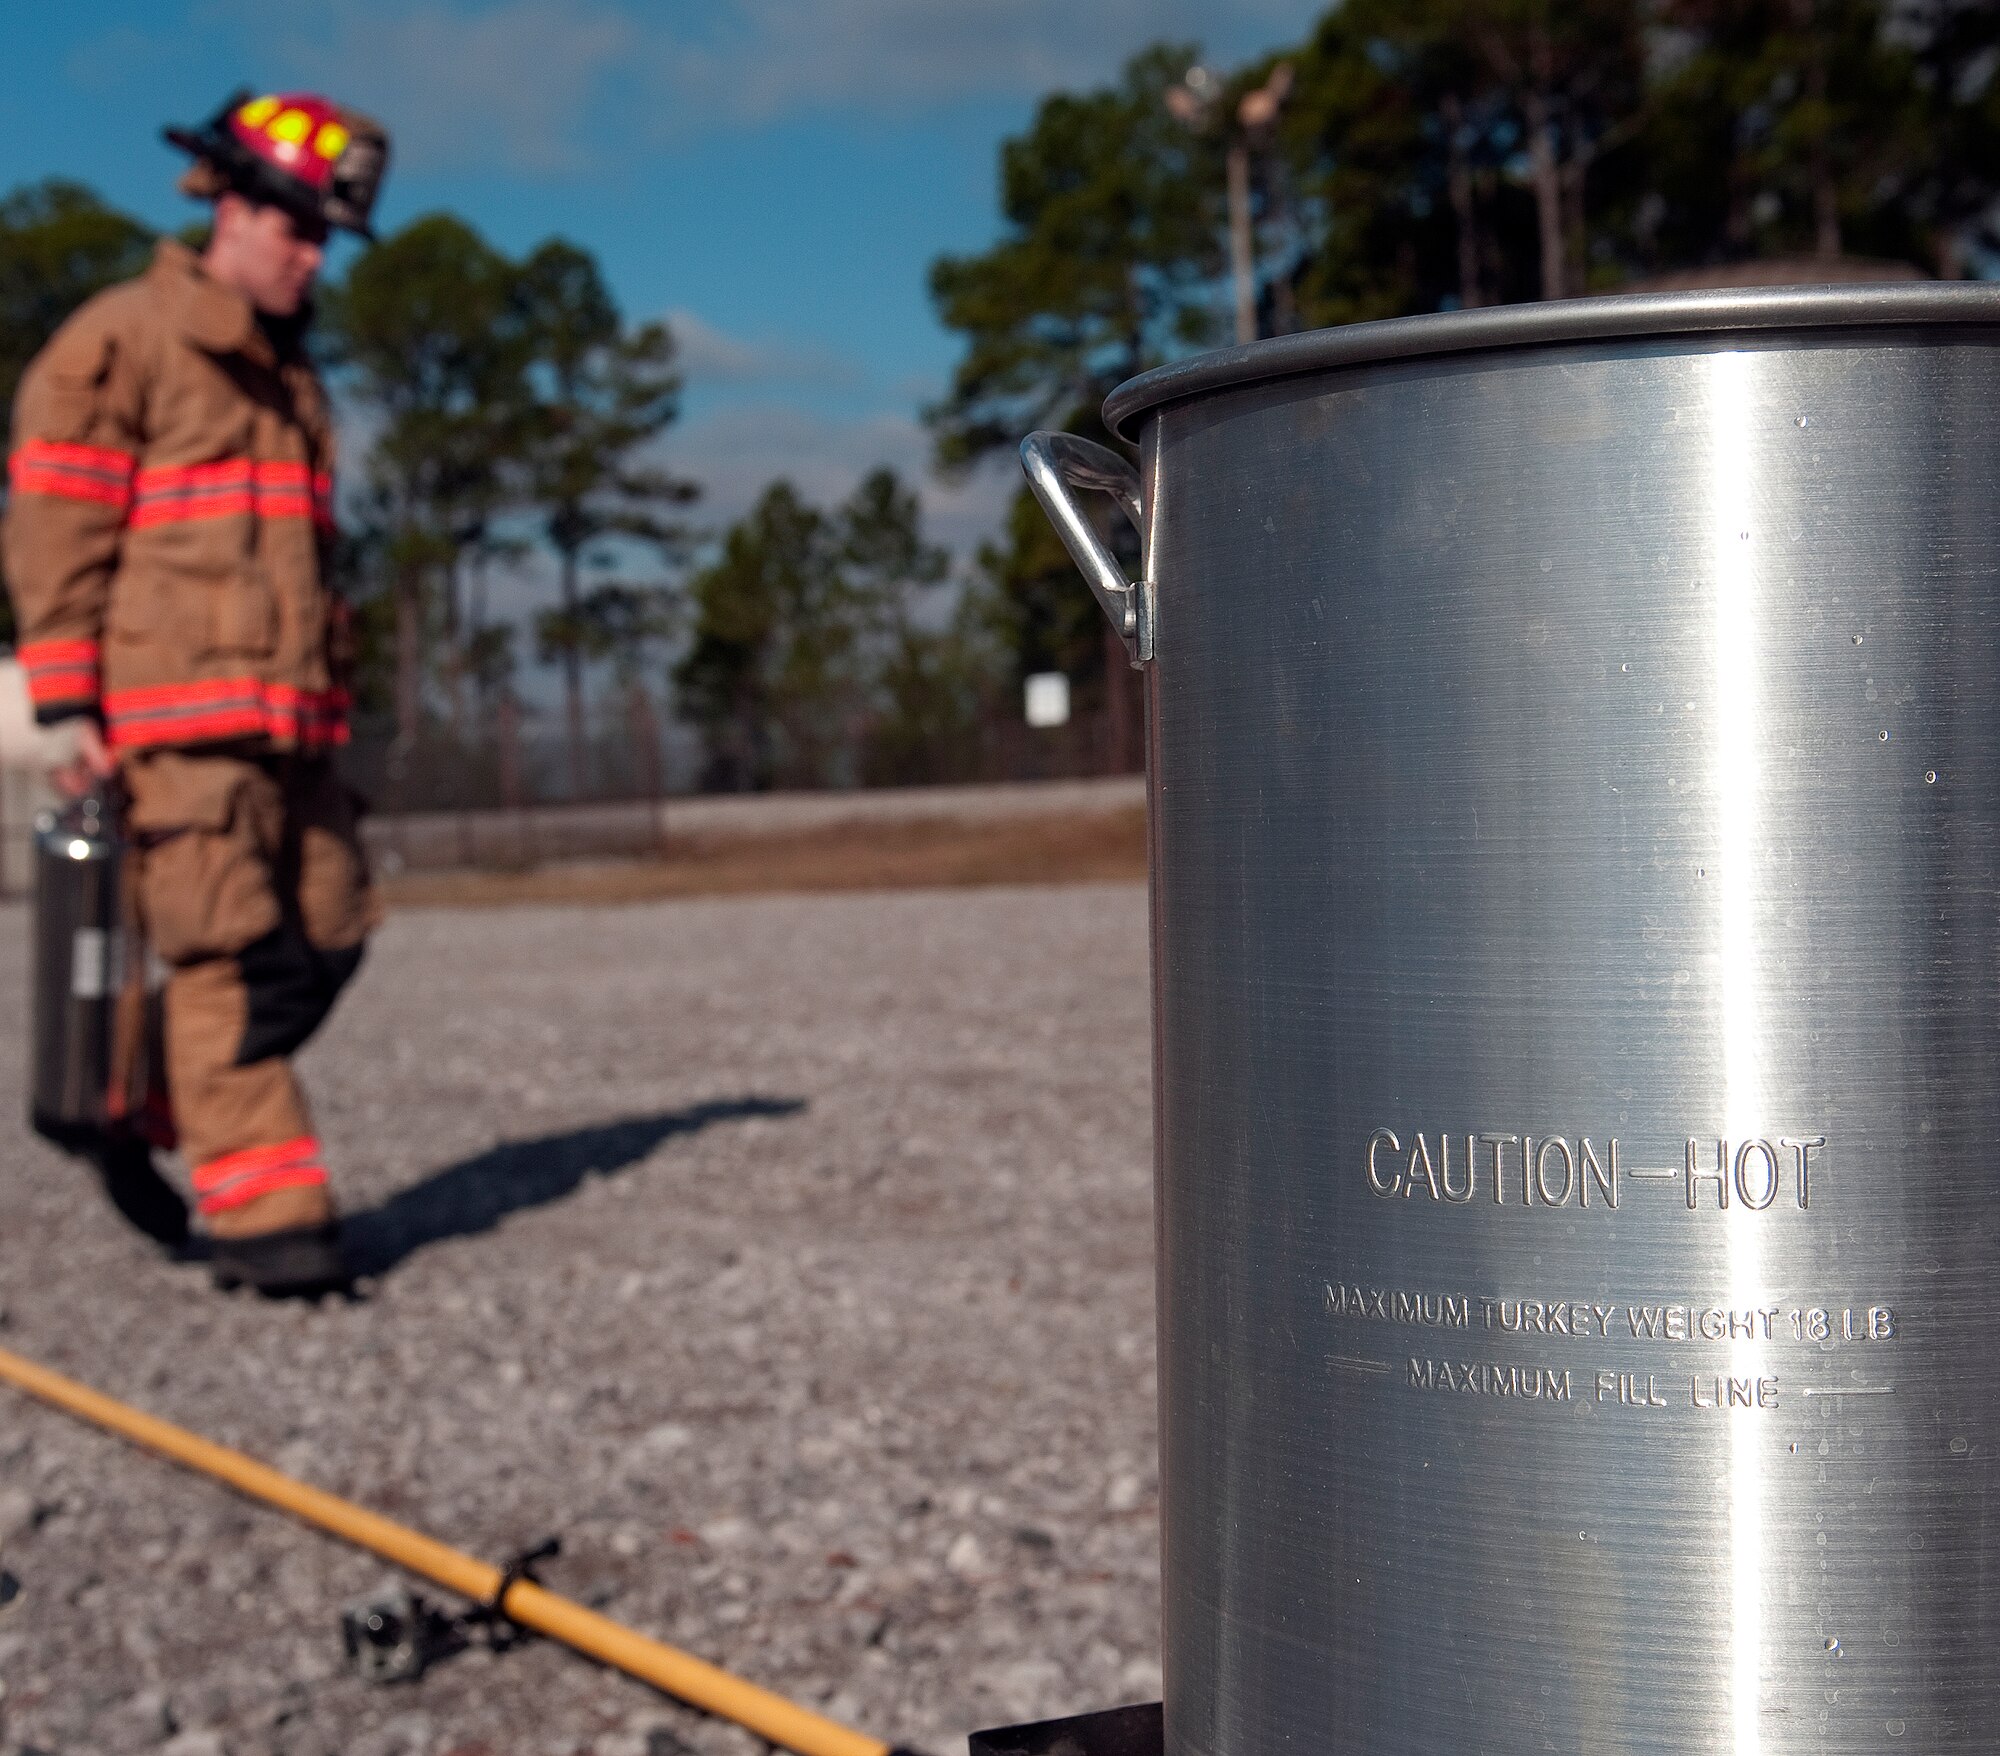 A firefighter from 1st Special Operations Civil Engineer Squadron prepares for a possible turkey fryer fire during a safety demonstration at the fire training area on Hurlburt Field, Fla., Nov. 27, 2013. Once cooking oil is heated beyond its cooking temperature, its vapors can ignite. (U.S. Air Force photo/Senior Airman Kentavist P. Brackin)